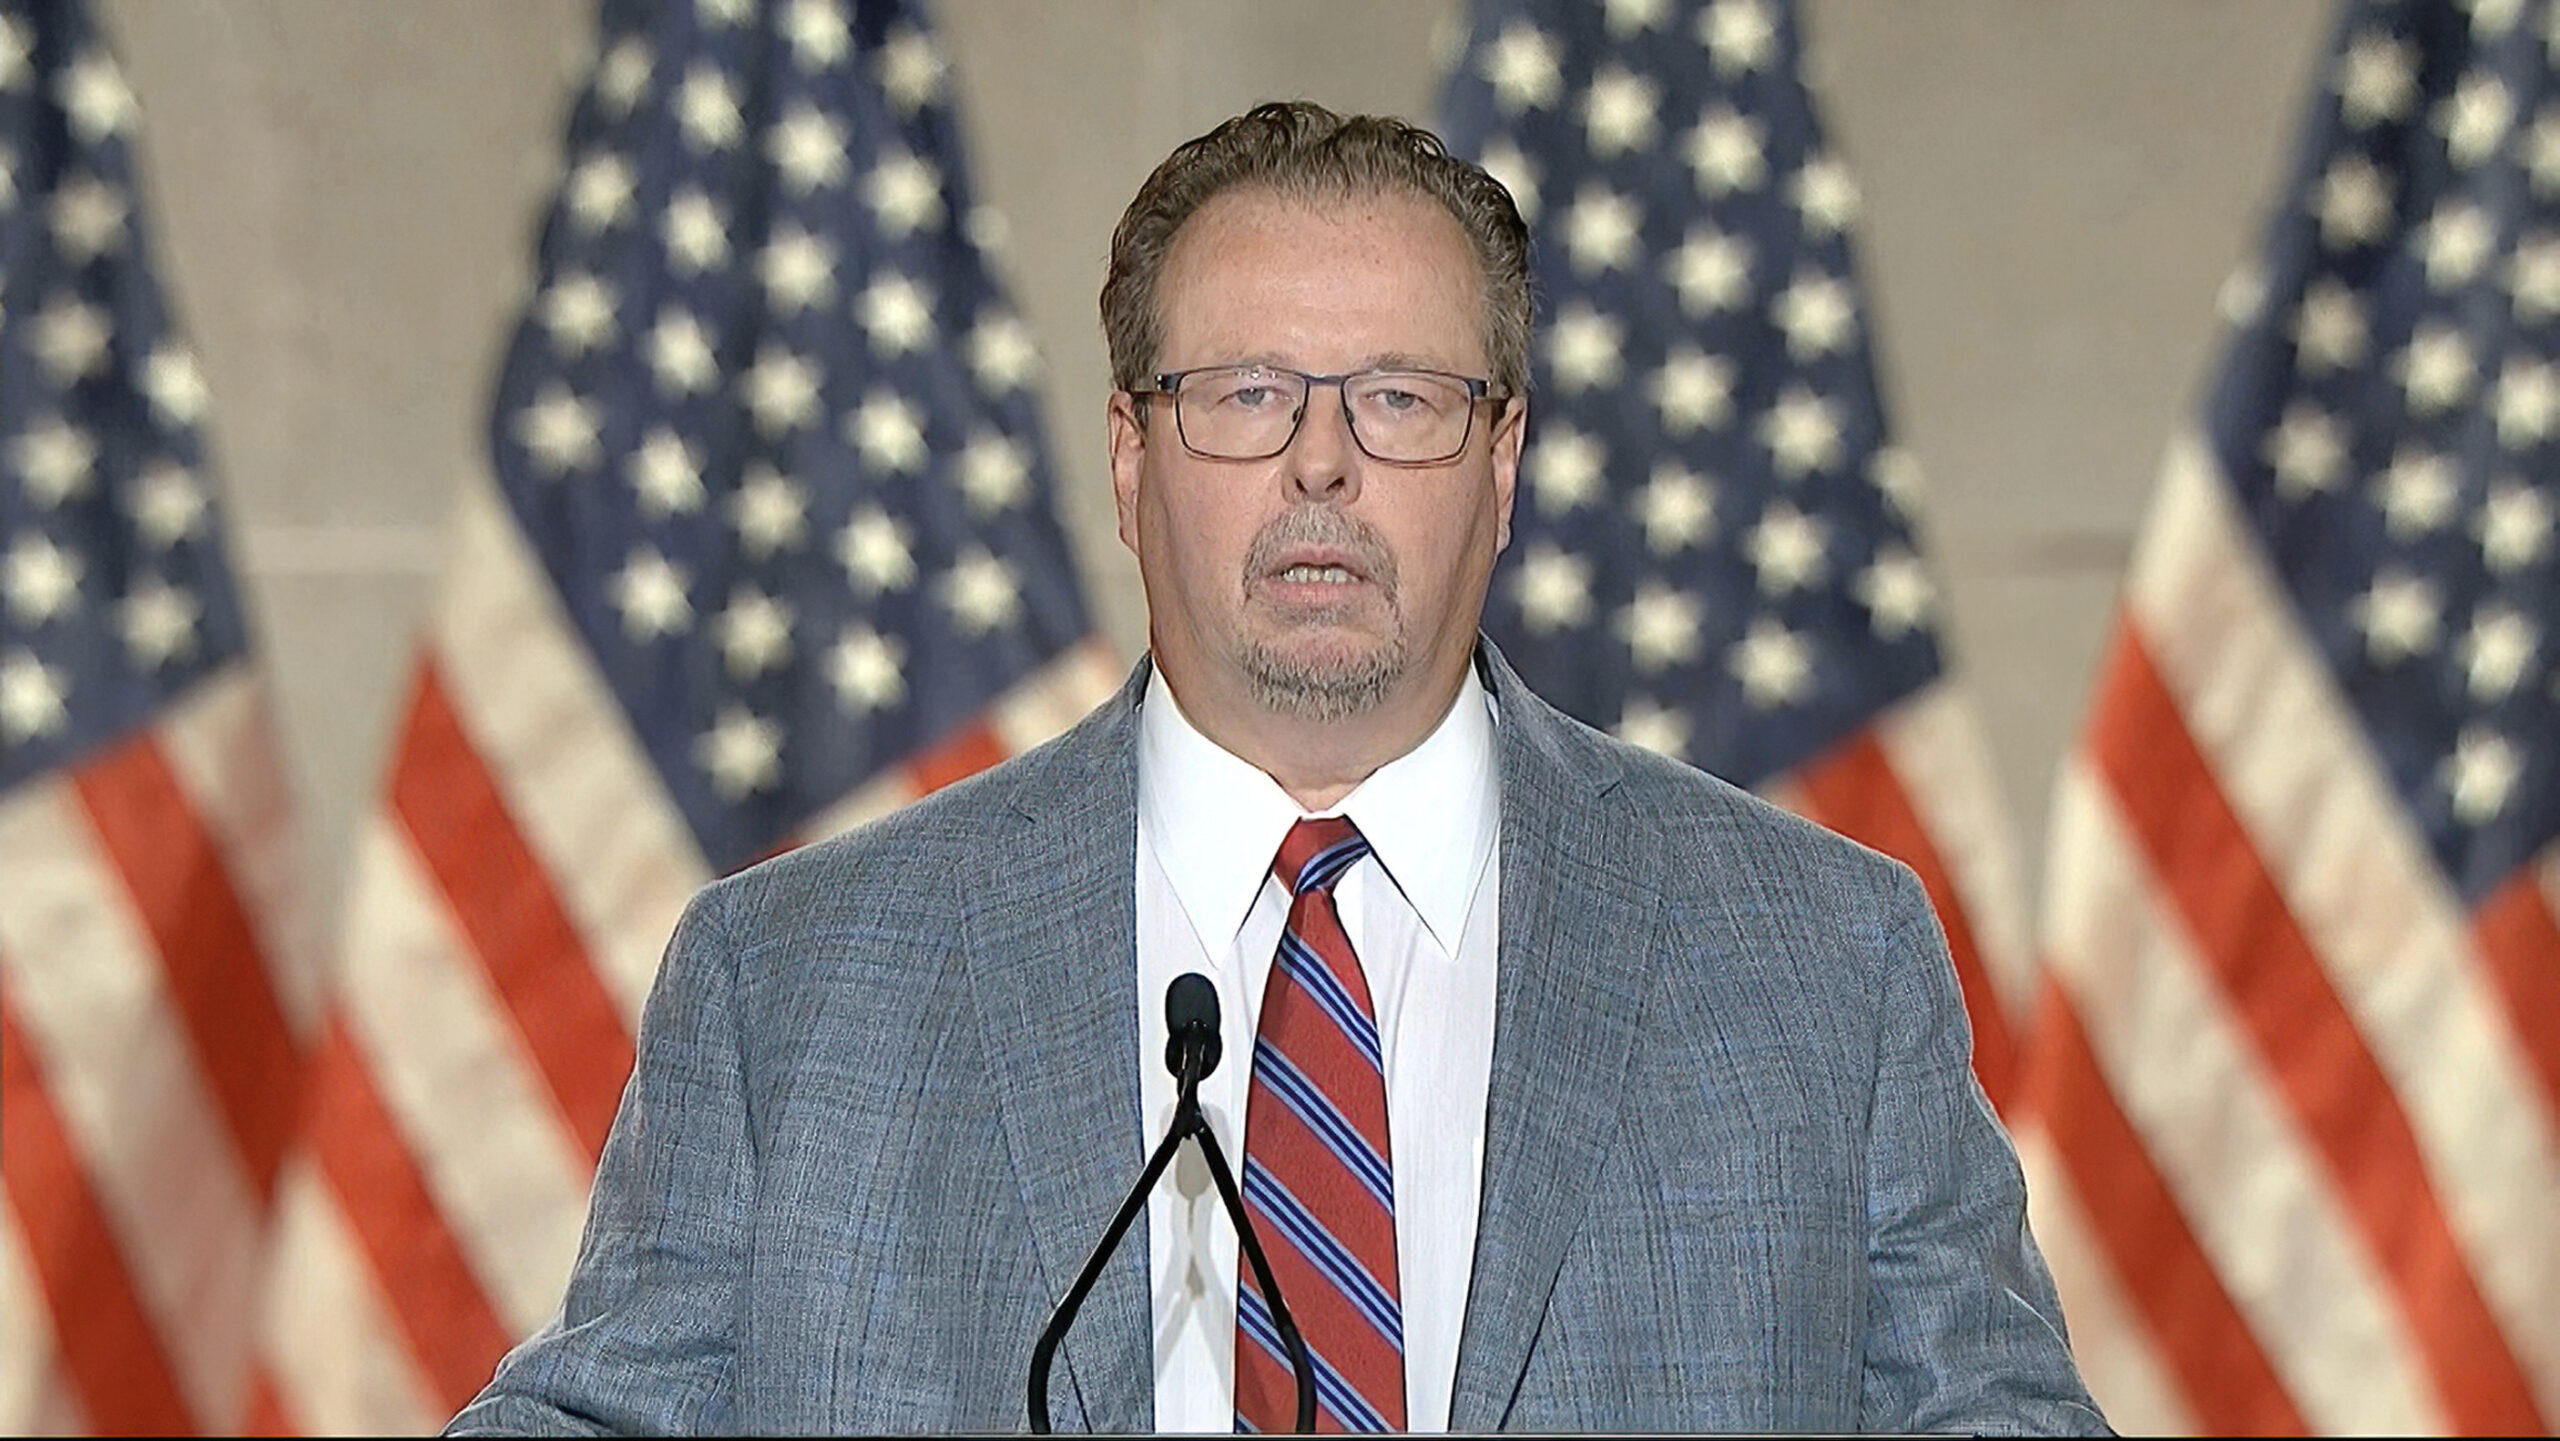 John Peterson speaks at the 2020 RNC